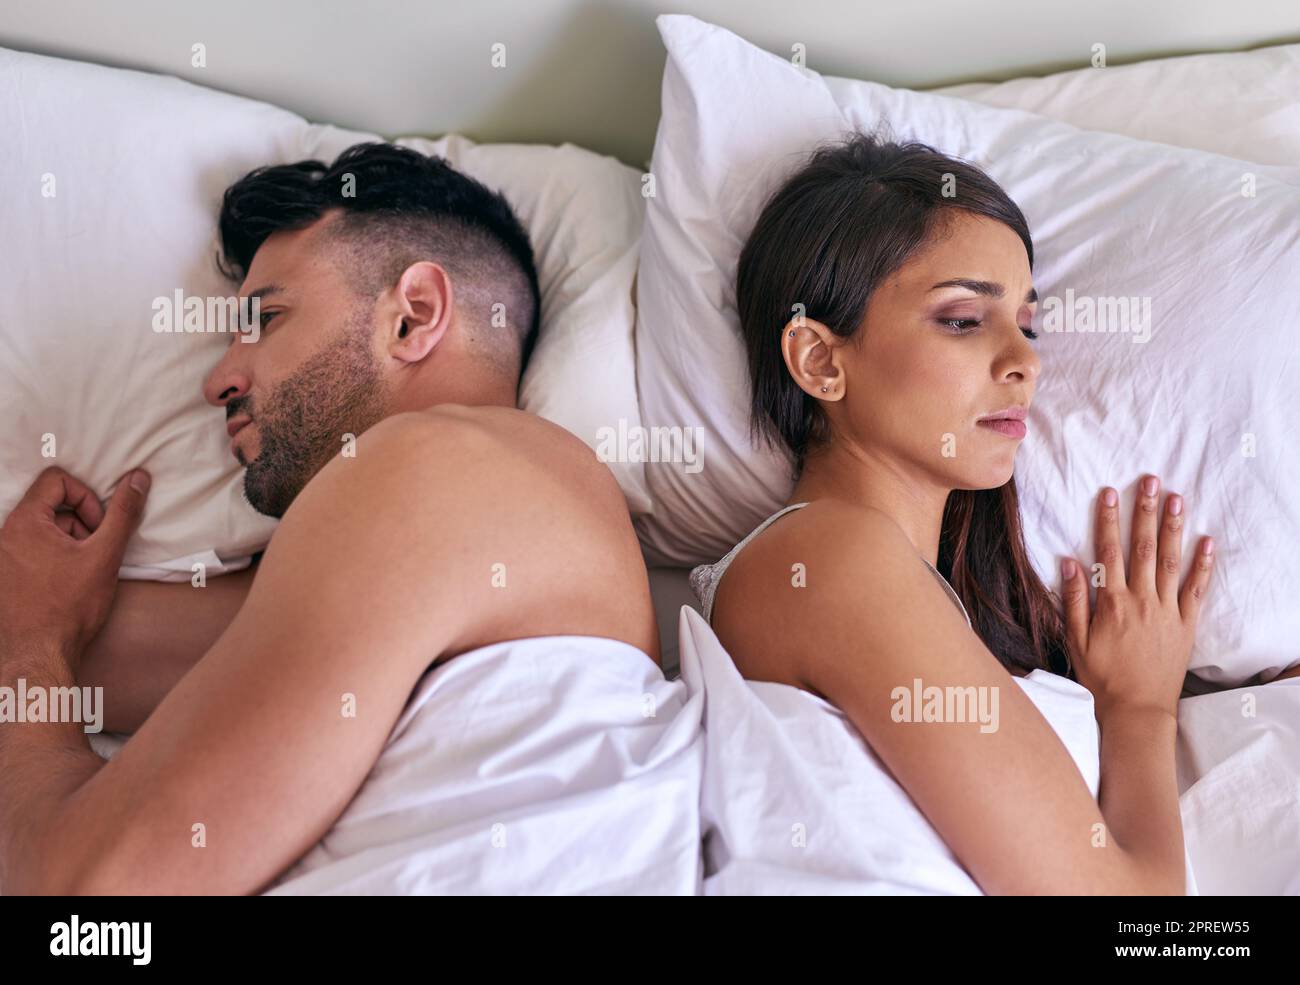 Turning their back to each other and their problems. a young married couple angry at each other in their bed at home. Stock Photo